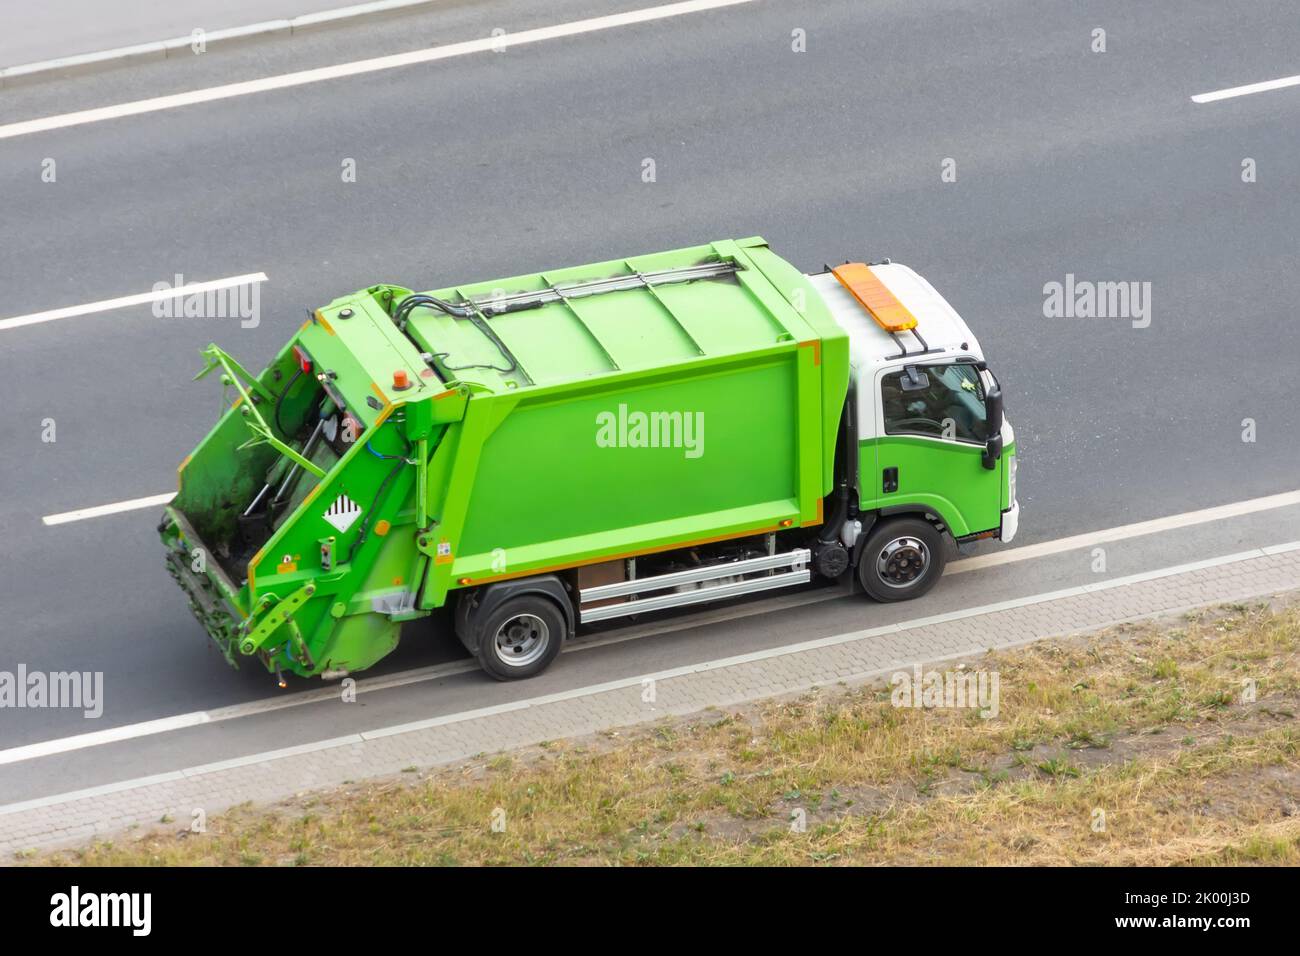 Recycling green truck rides on the road in the city Stock Photo